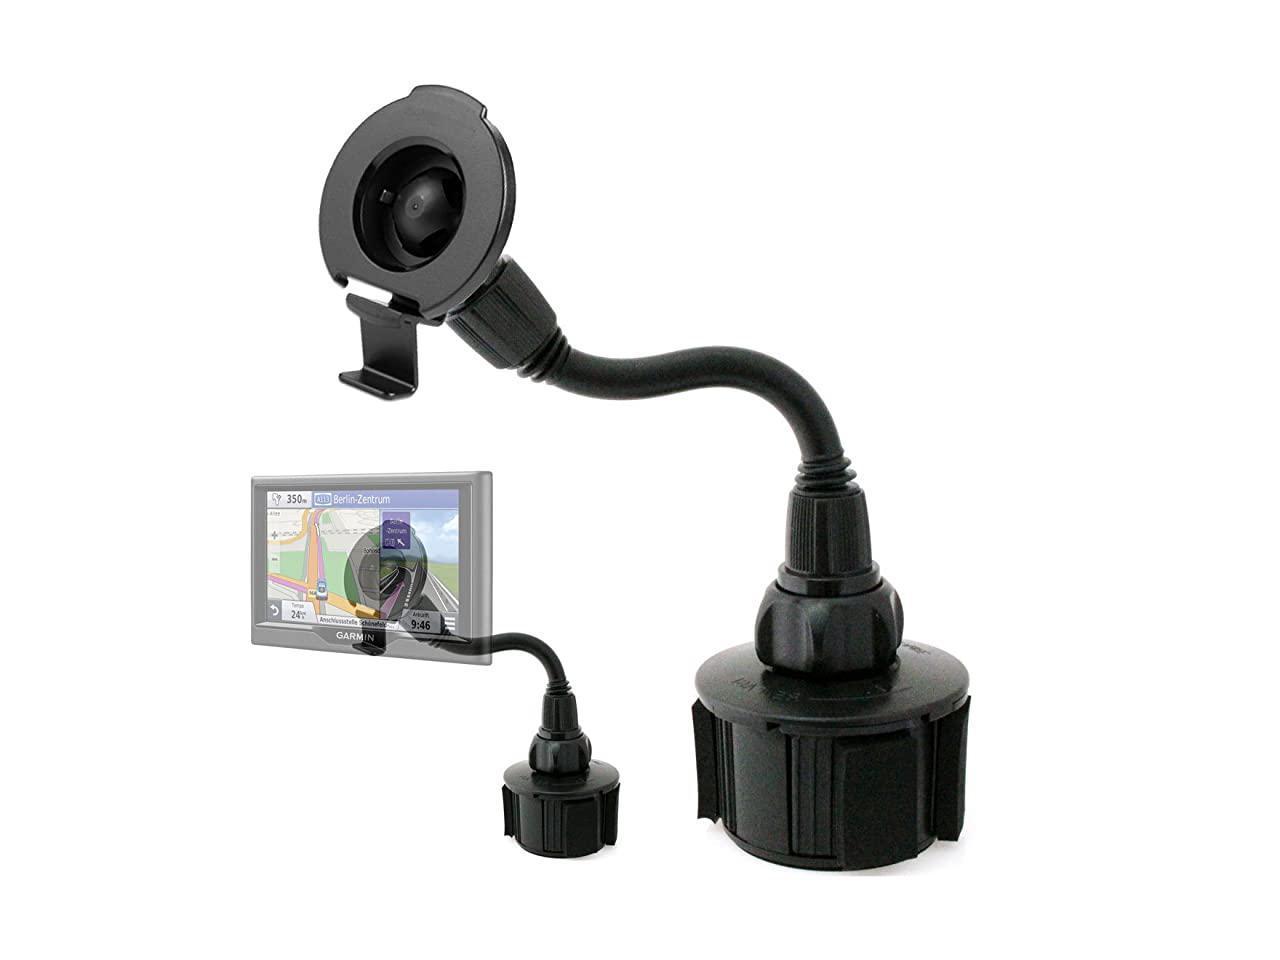 Windshield Suction Cup Mount GPS Holder Fit for Garmin Nuvi 2457LMT 2497LMT ds